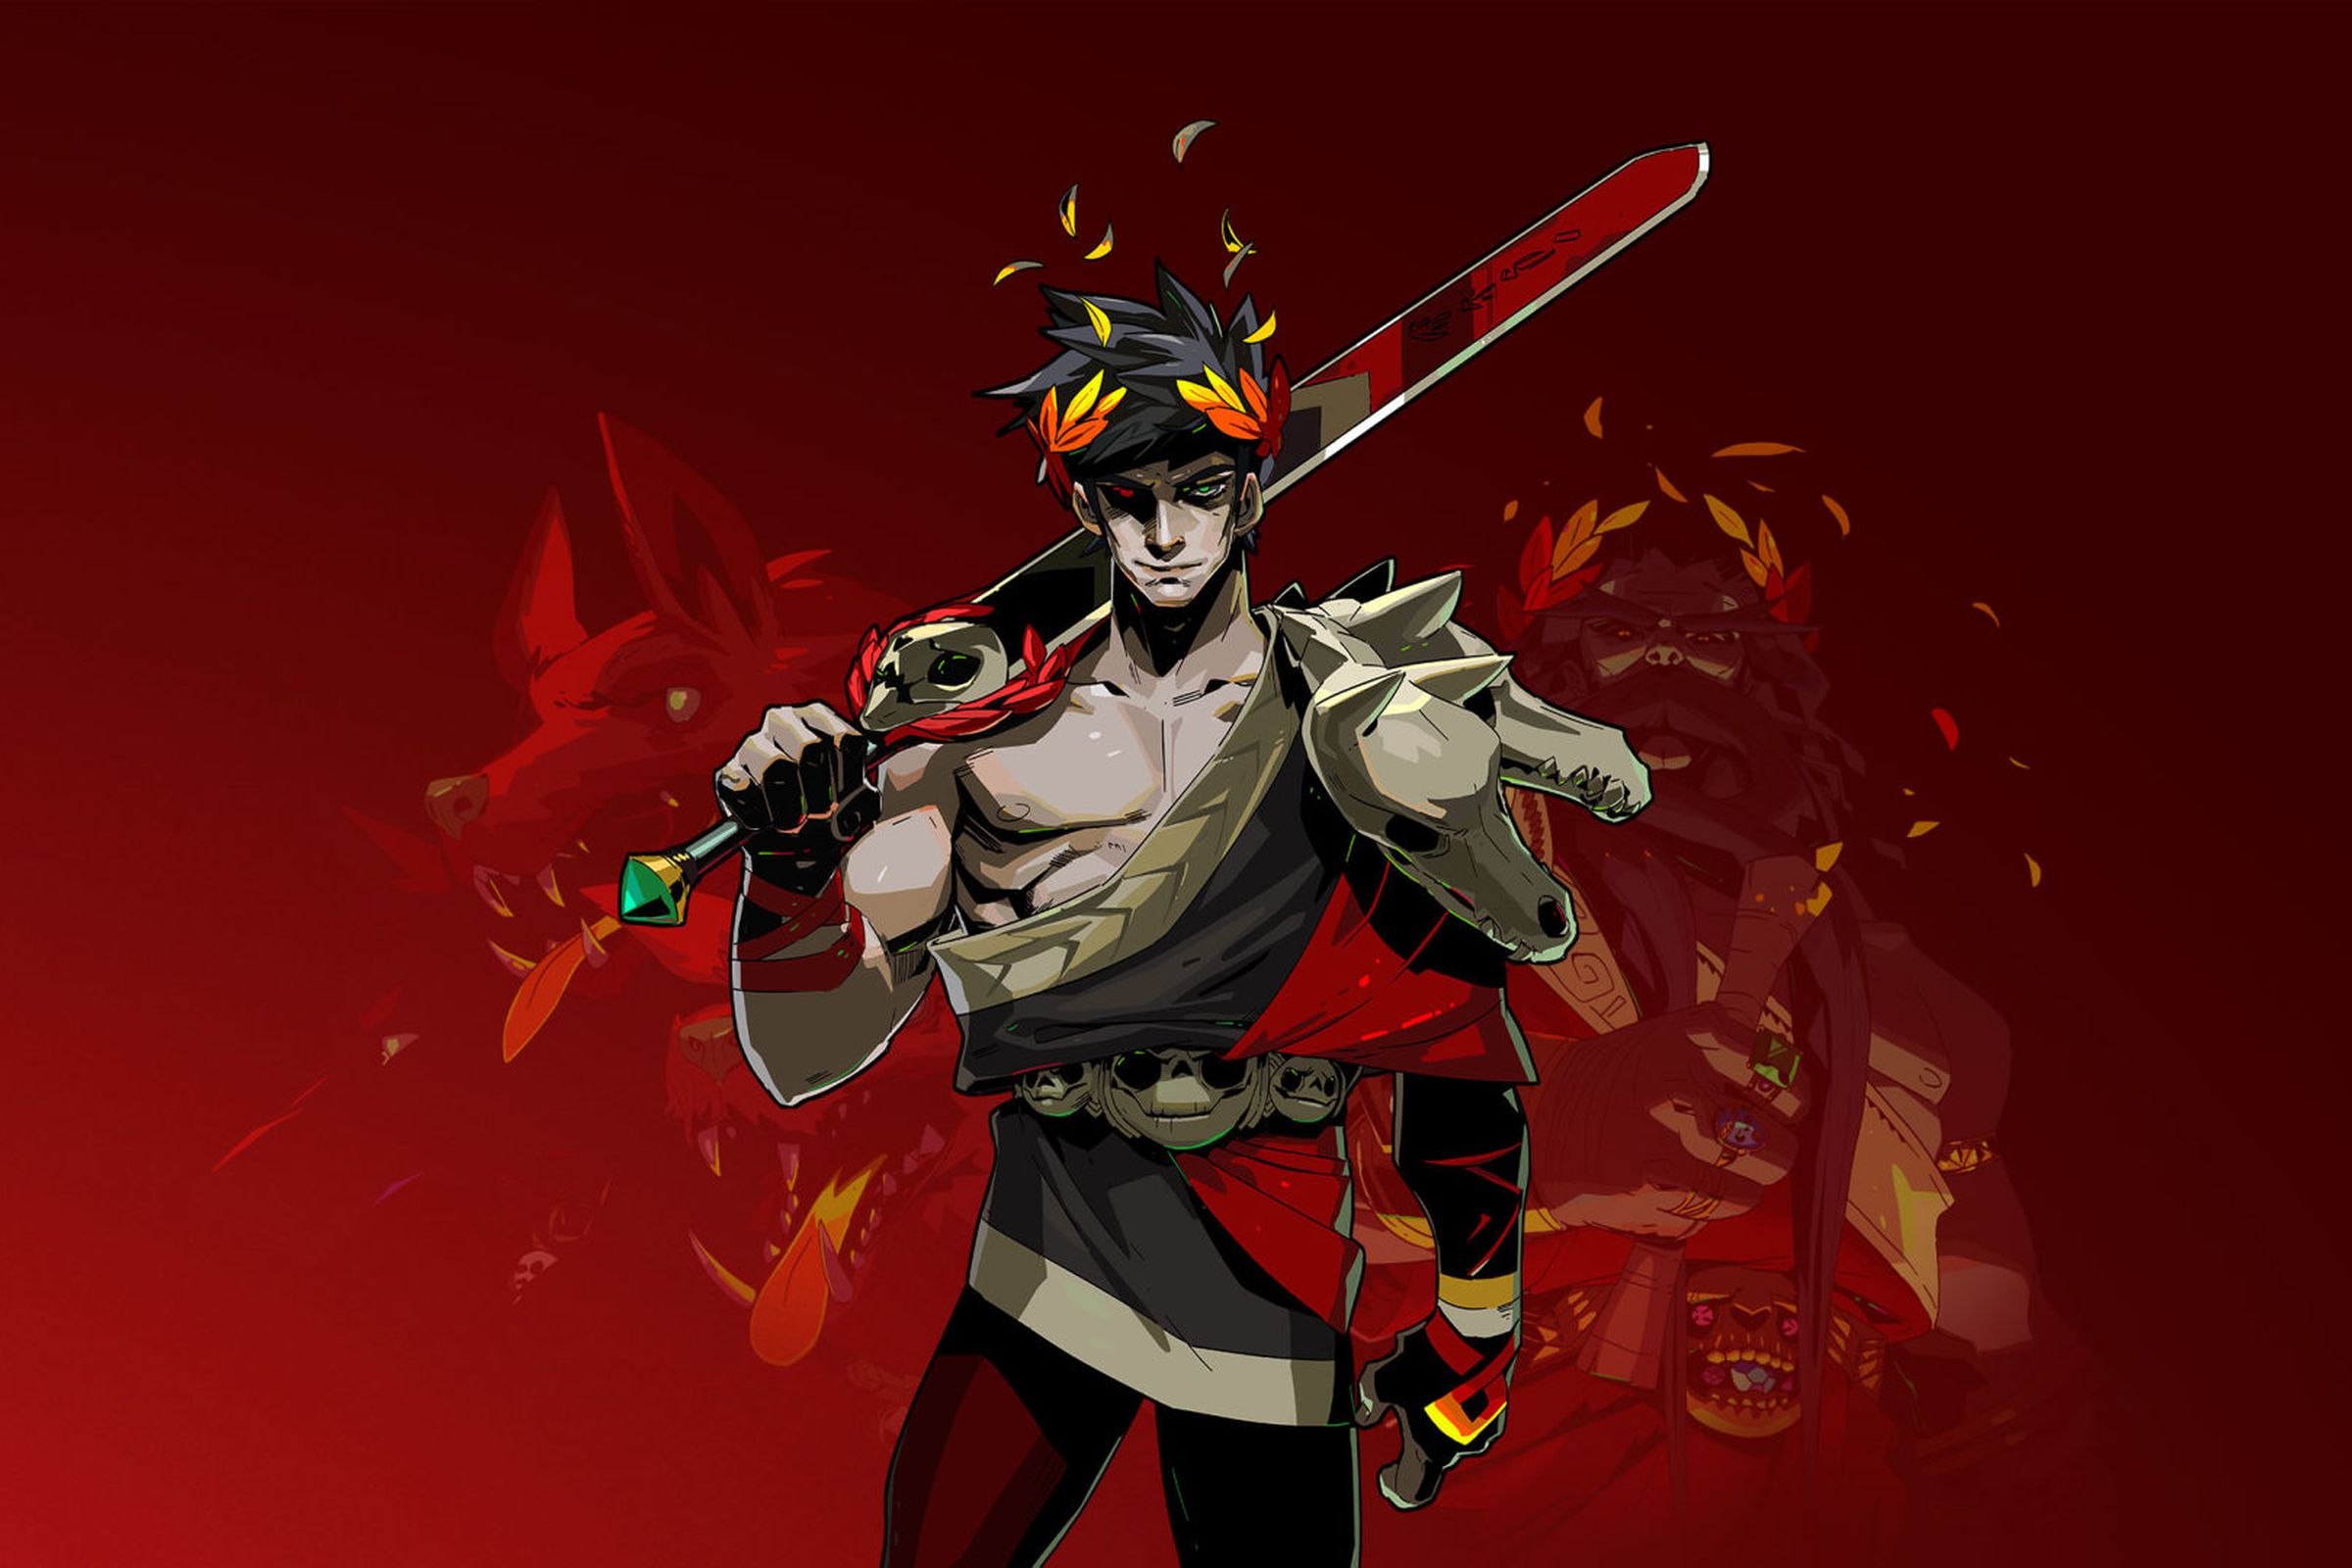 Artwork for Hades with a muscular man in ancient Greek clothing wit a crown of red, yellow, and orange laurels and a massive red sword hanging over his right shoulder.